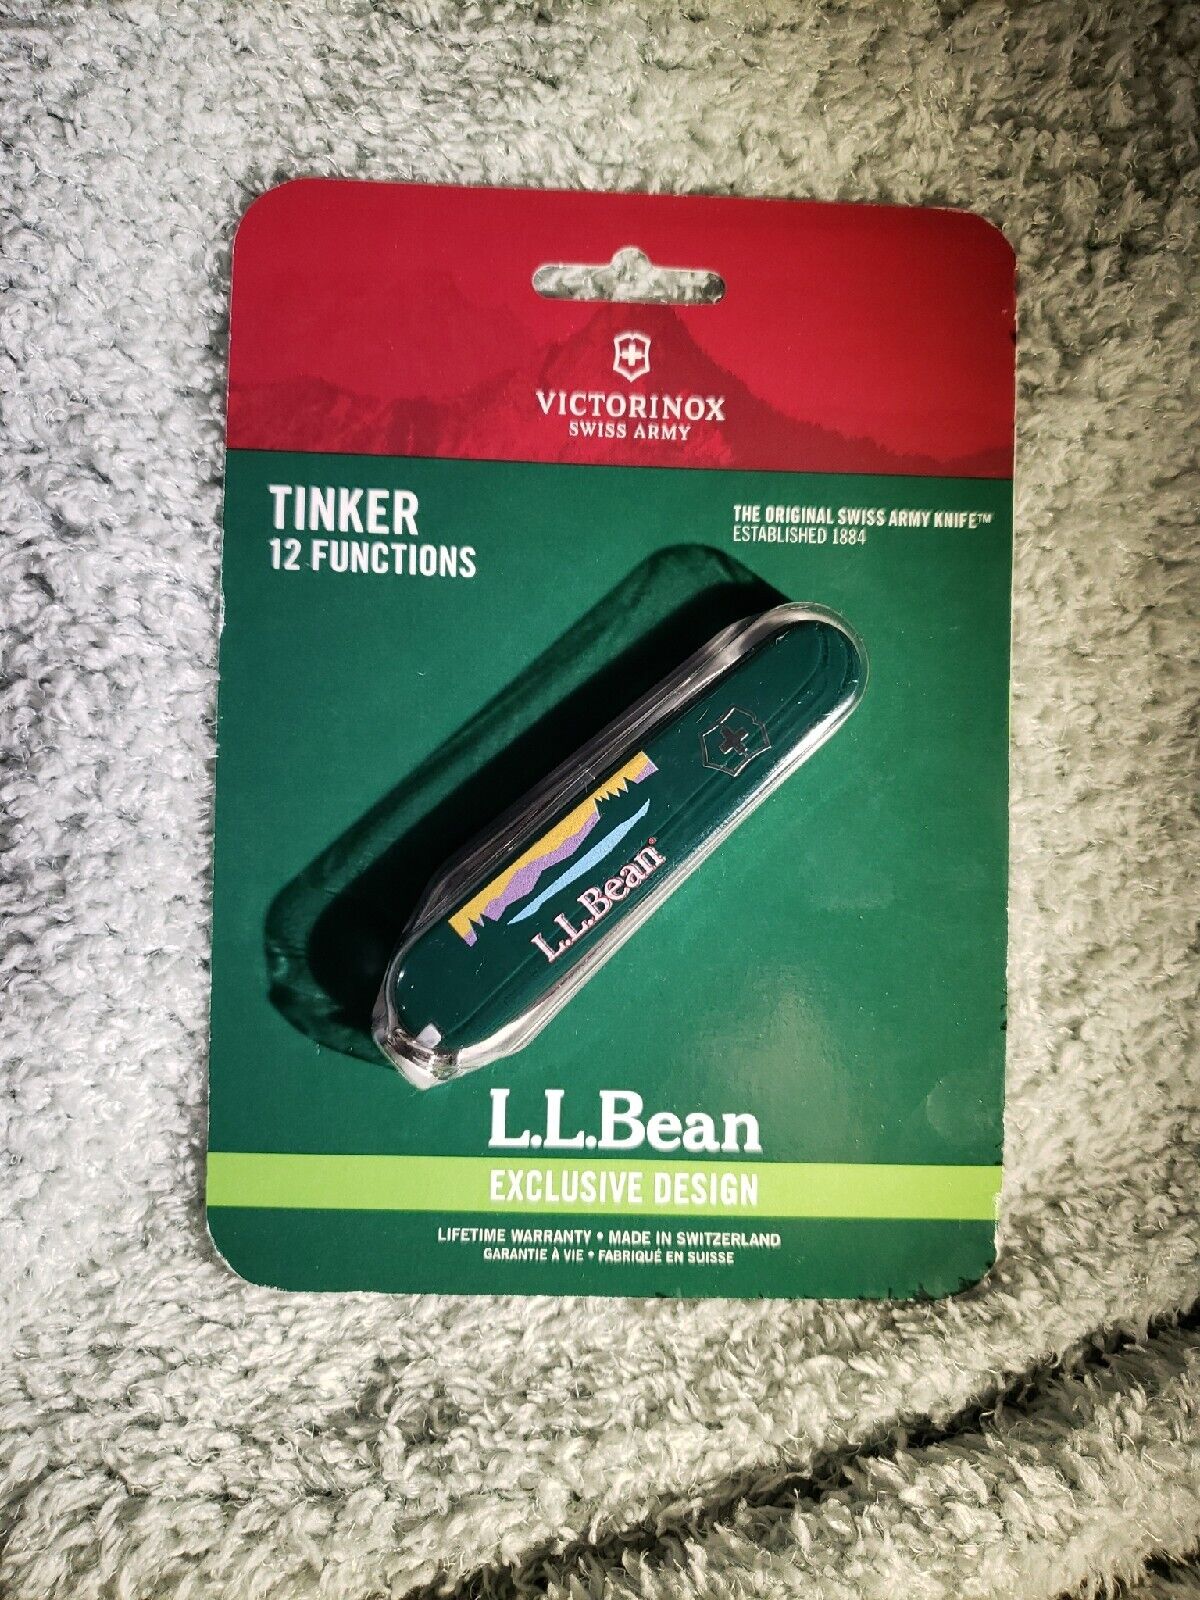 LL Bean Tinker Original Swiss Army Knife 12 Function Exclusive Design New Green 